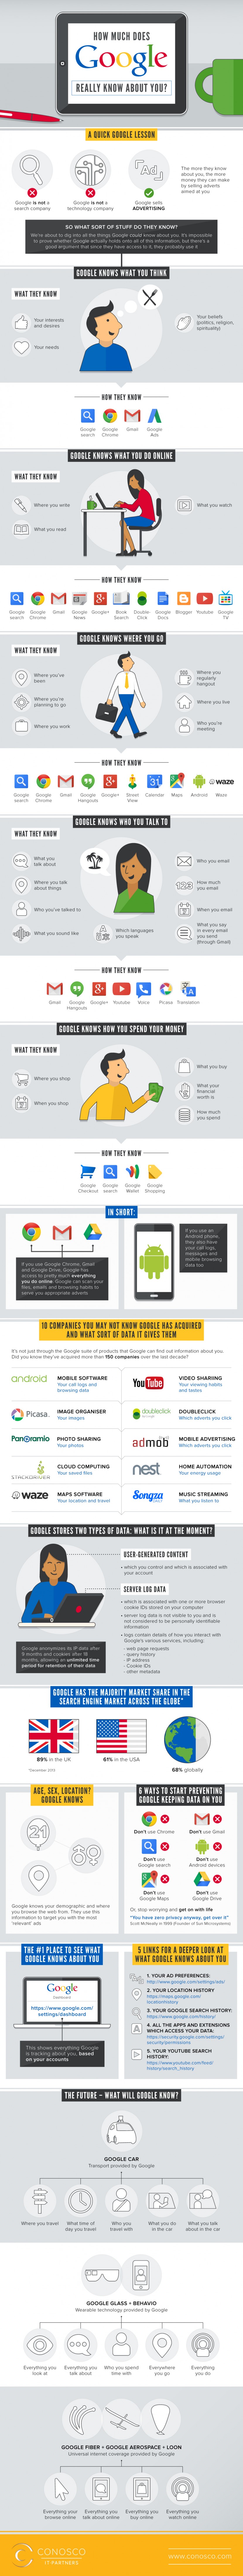 Infographie 199 - What Google knows about you